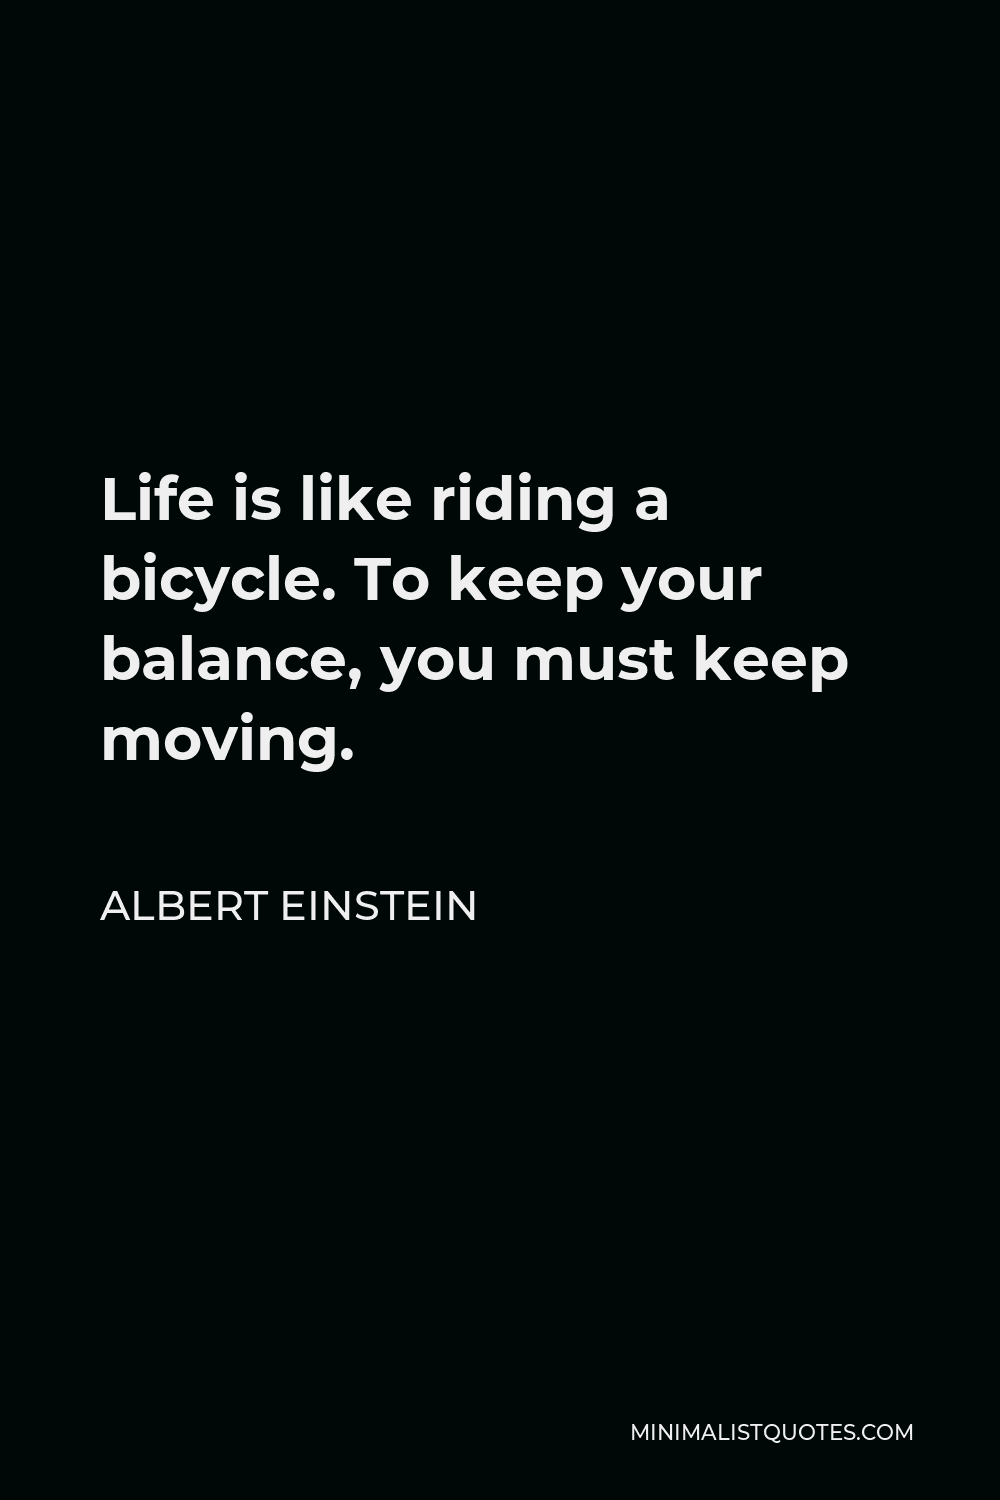 Albert Einstein Quote - Life is like riding a bicycle. To keep your balance, you must keep moving.